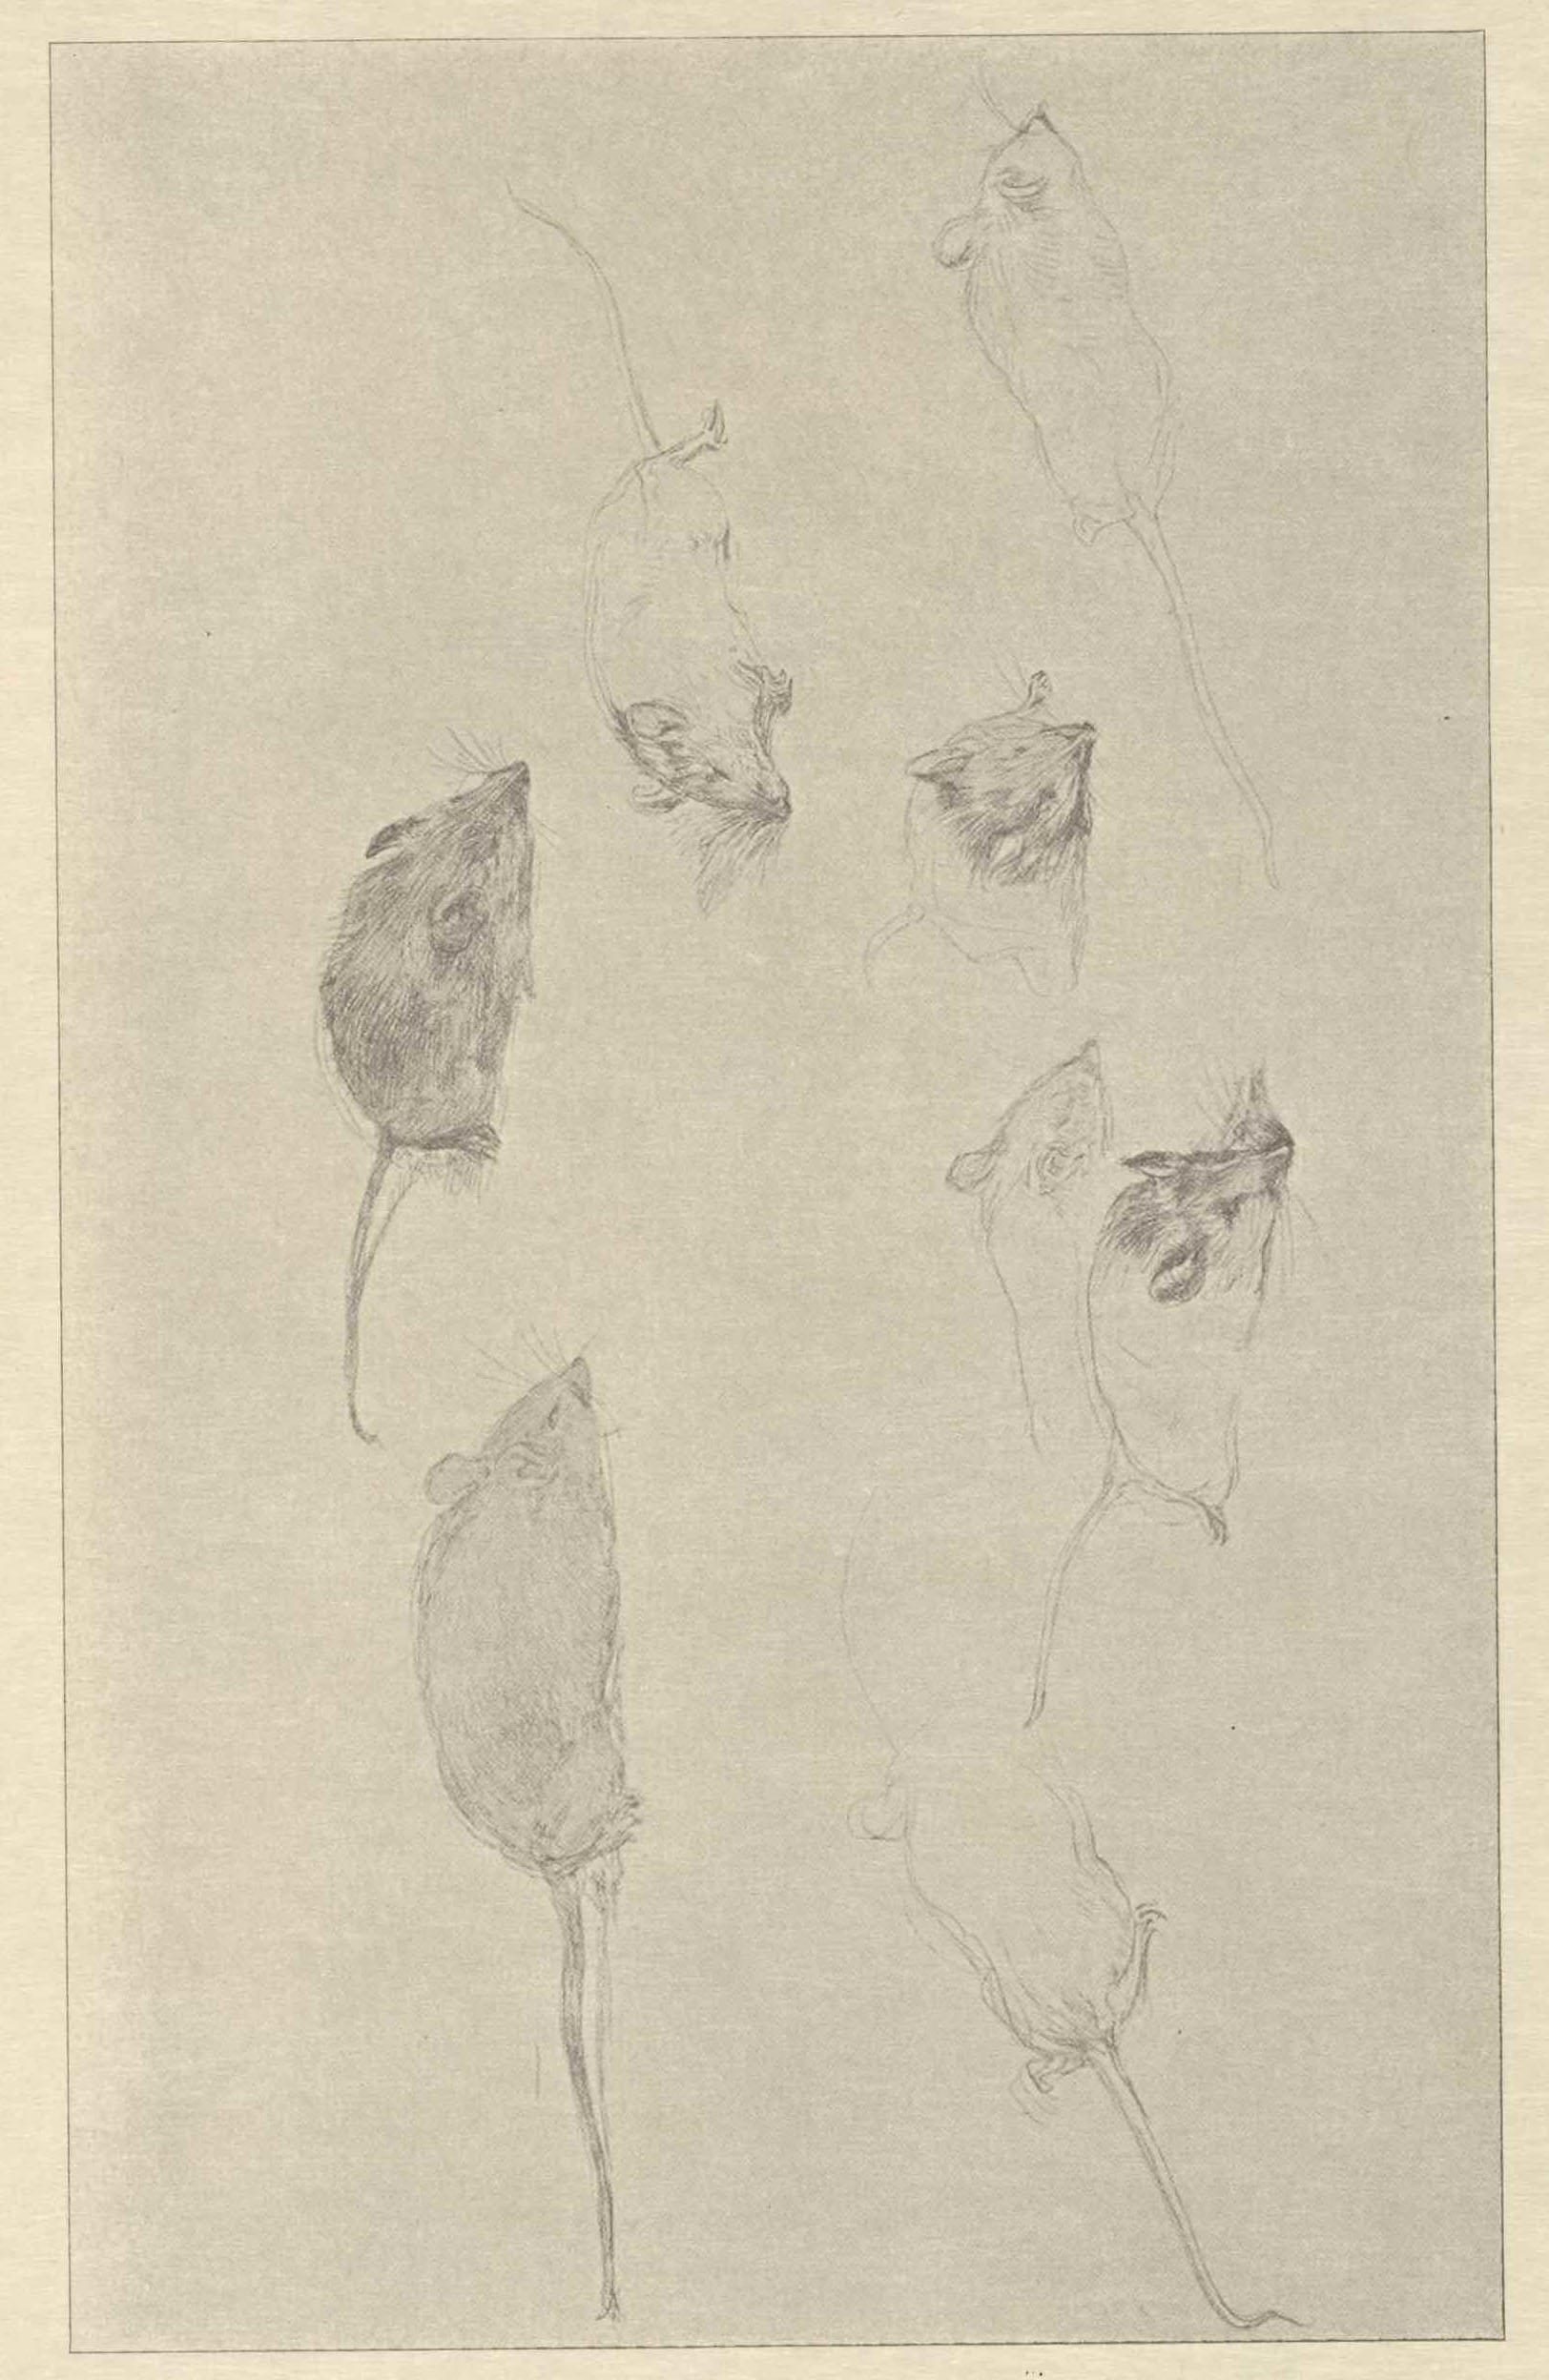 This reproduction of a silverpoint drawing is set within a thin rectangular border,
      in 
      landscape orientation. The drawing is a study of eight mice in various postures and
      positions 
      in a realistic style. The mice are rendered in dark gray atop a light grey background.
      Some mice 
      are rendered in more detail than others. The two mice on the left are shown in great
      detail, with 
      fur-covered faces and bodies, while the other six mice are only partially drawn, with
      half-completed 
      outlines, faces, and tails.